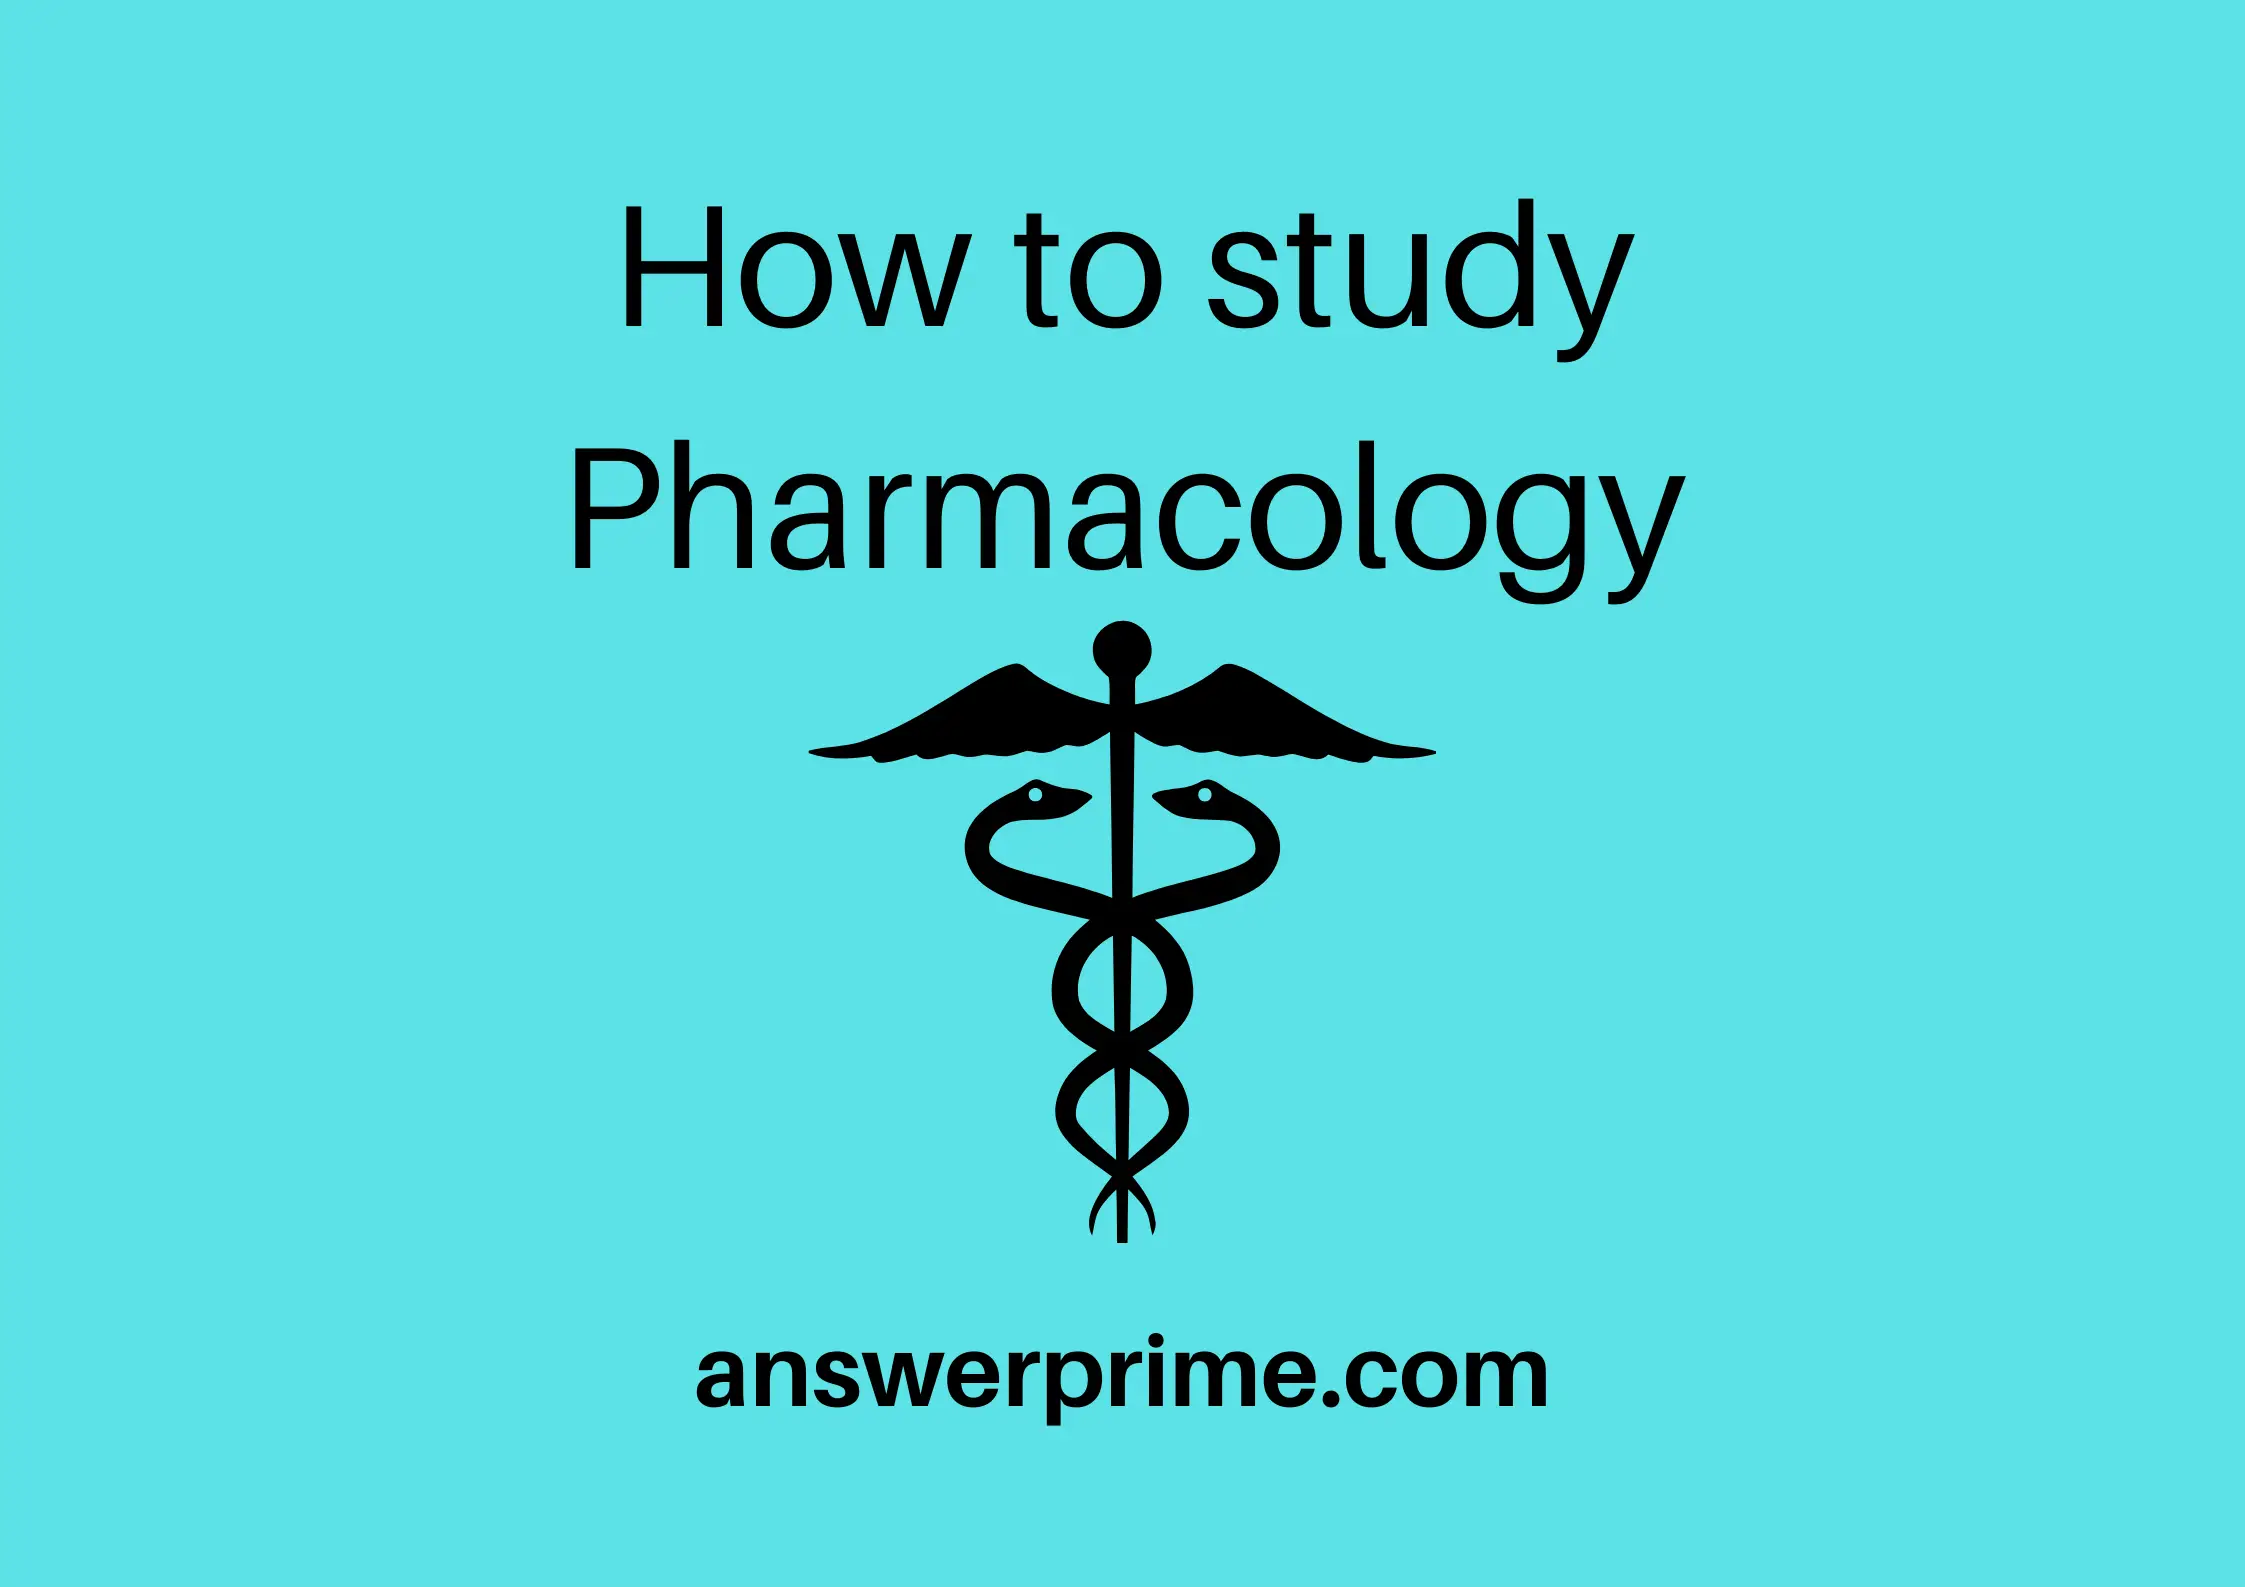 How to study Pharmacology